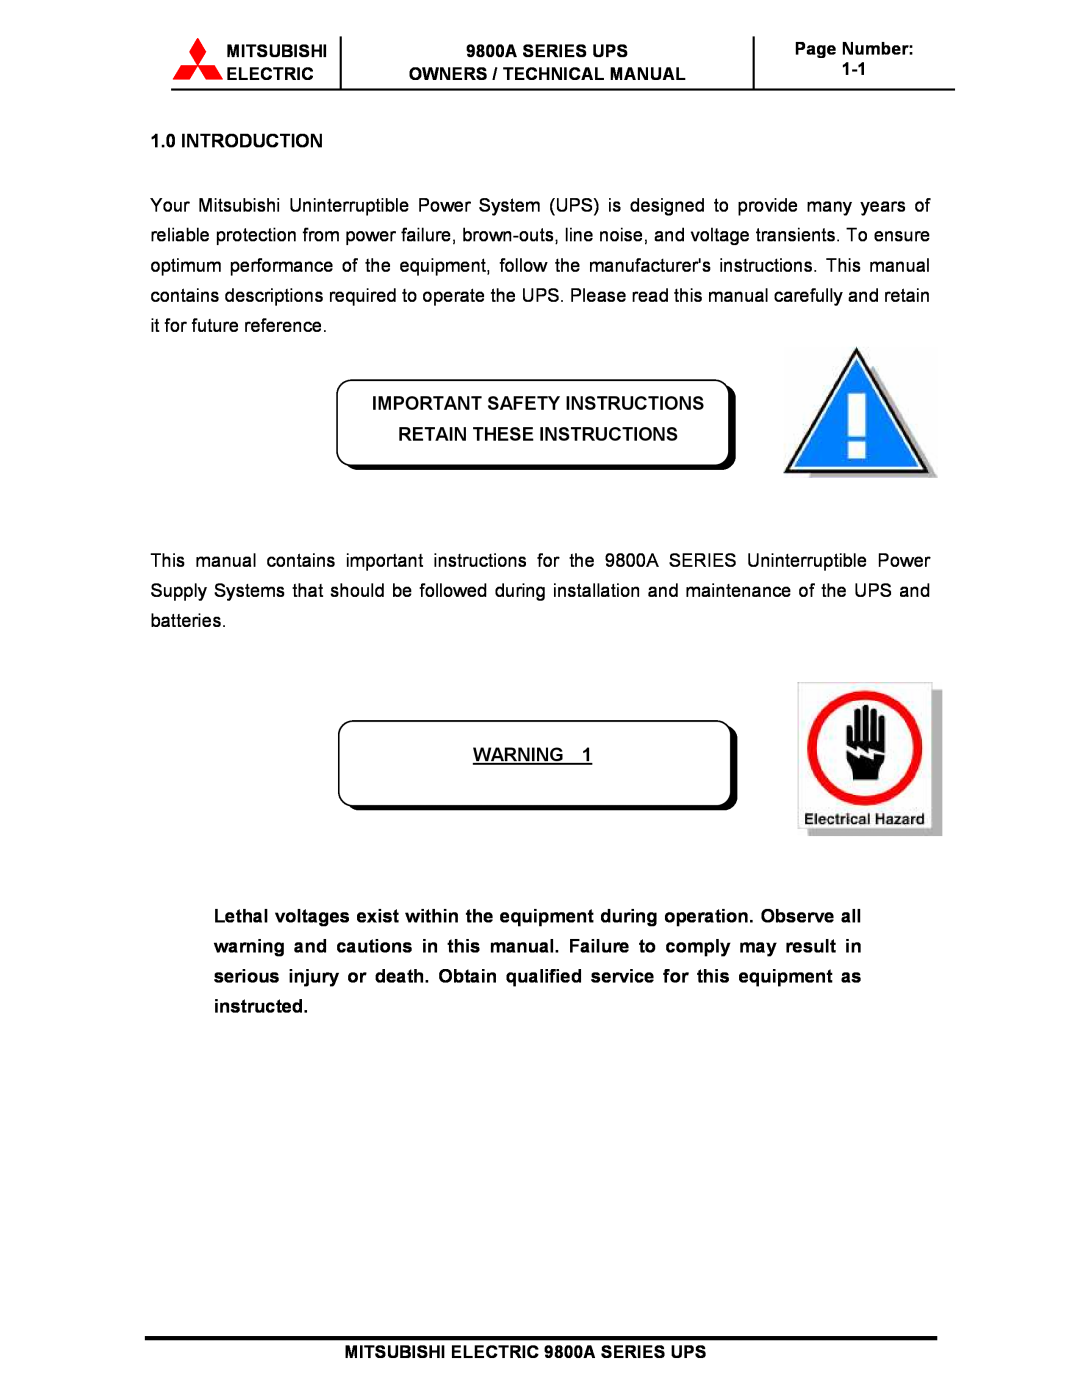 Mitsubishi 9800A Series technical manual Introduction, Important Safety Instructions Retain These Instructions 